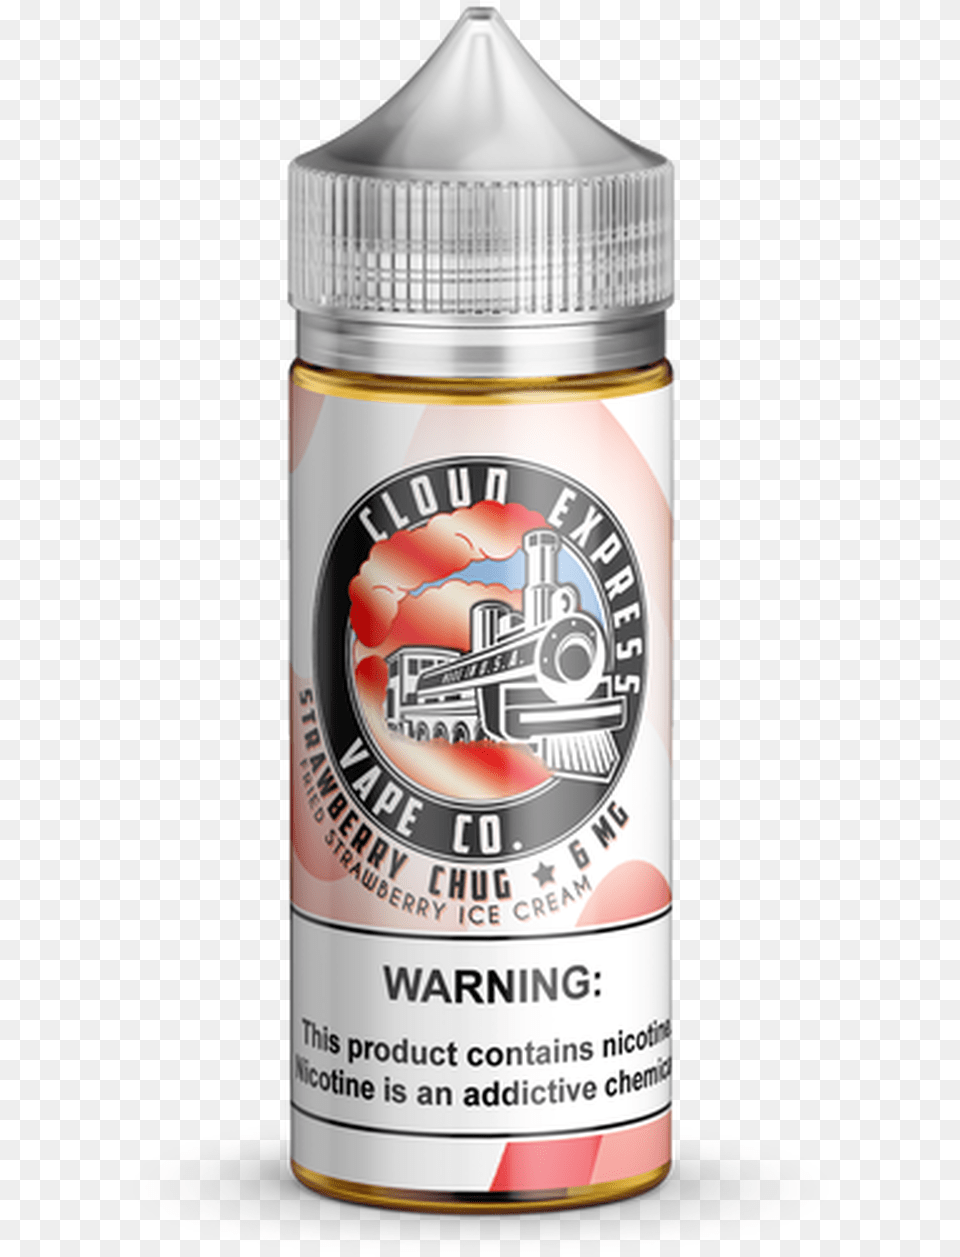 Strawberry Chug Cactus Cooler Vape Juice, Bottle, Can, Tin, Spray Can Free Png